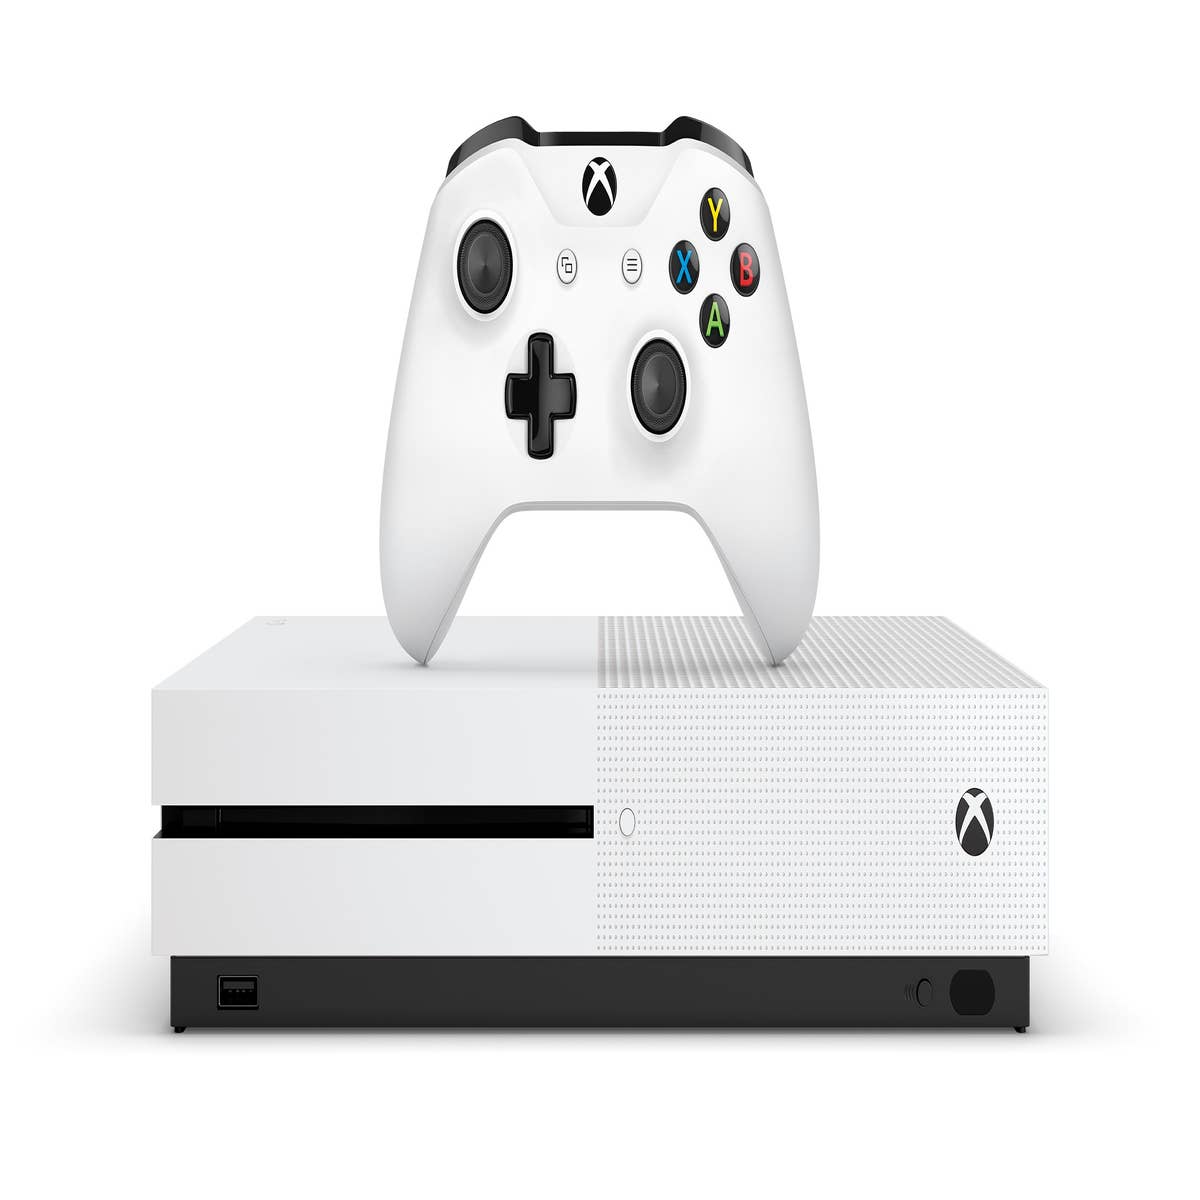 A Guide to the Different Xbox One Models